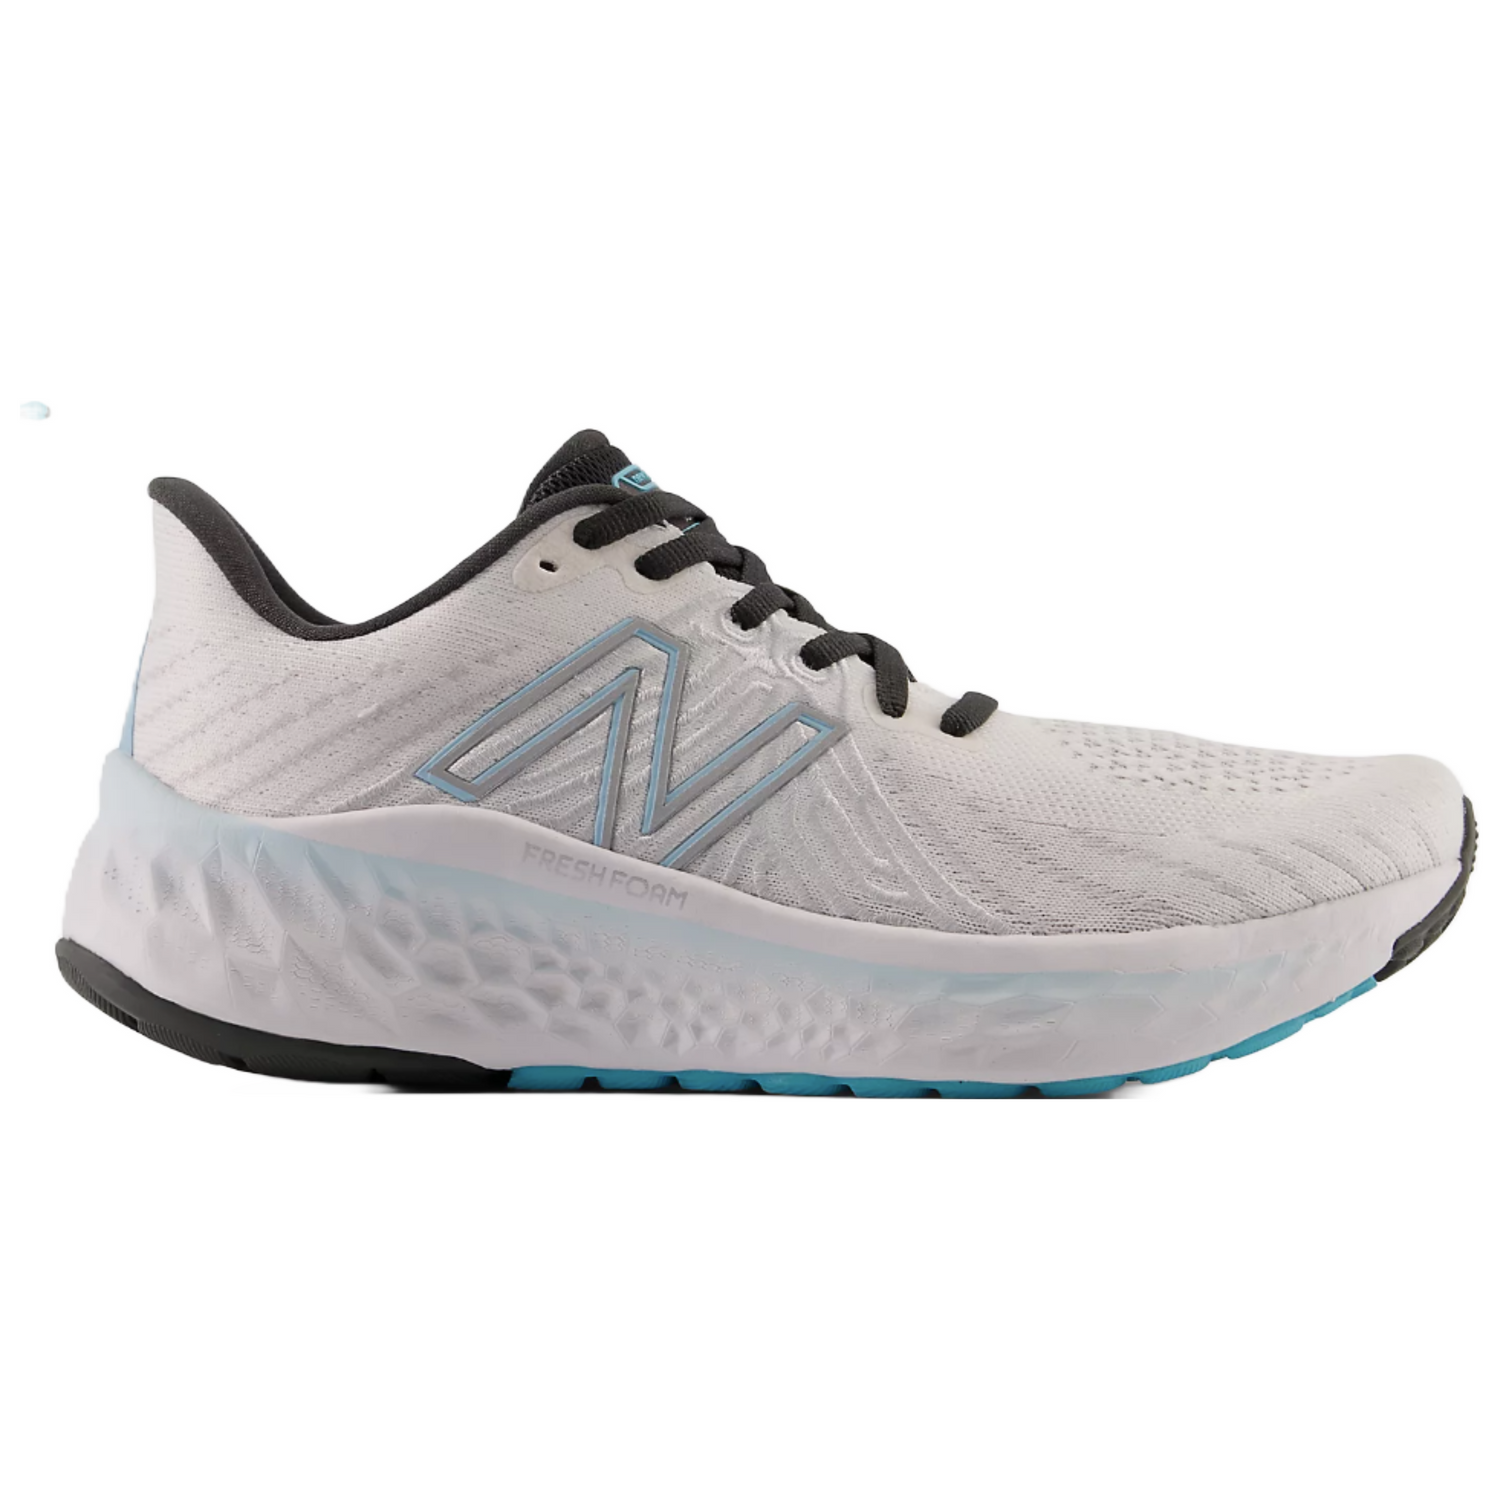 New Balance Vongo Running shoe in white with blue accents 